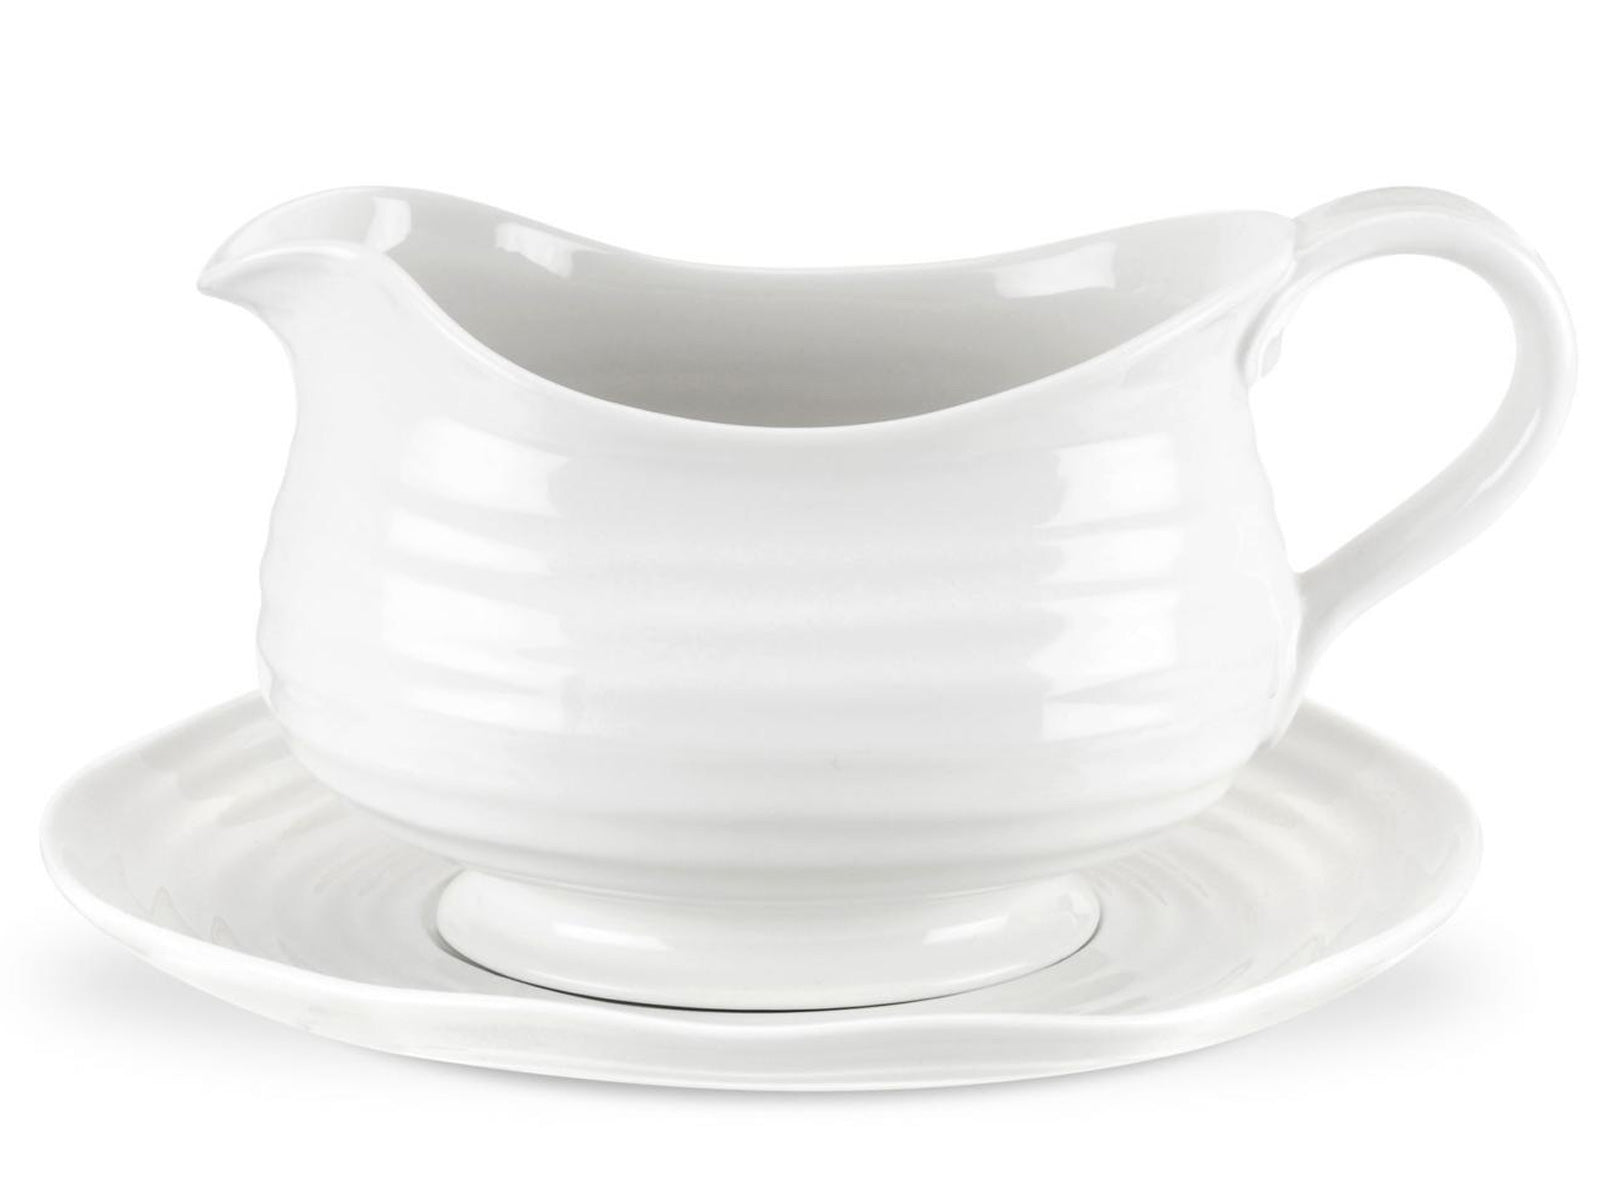 a rippled white porcelain gravy boat with a matching plate